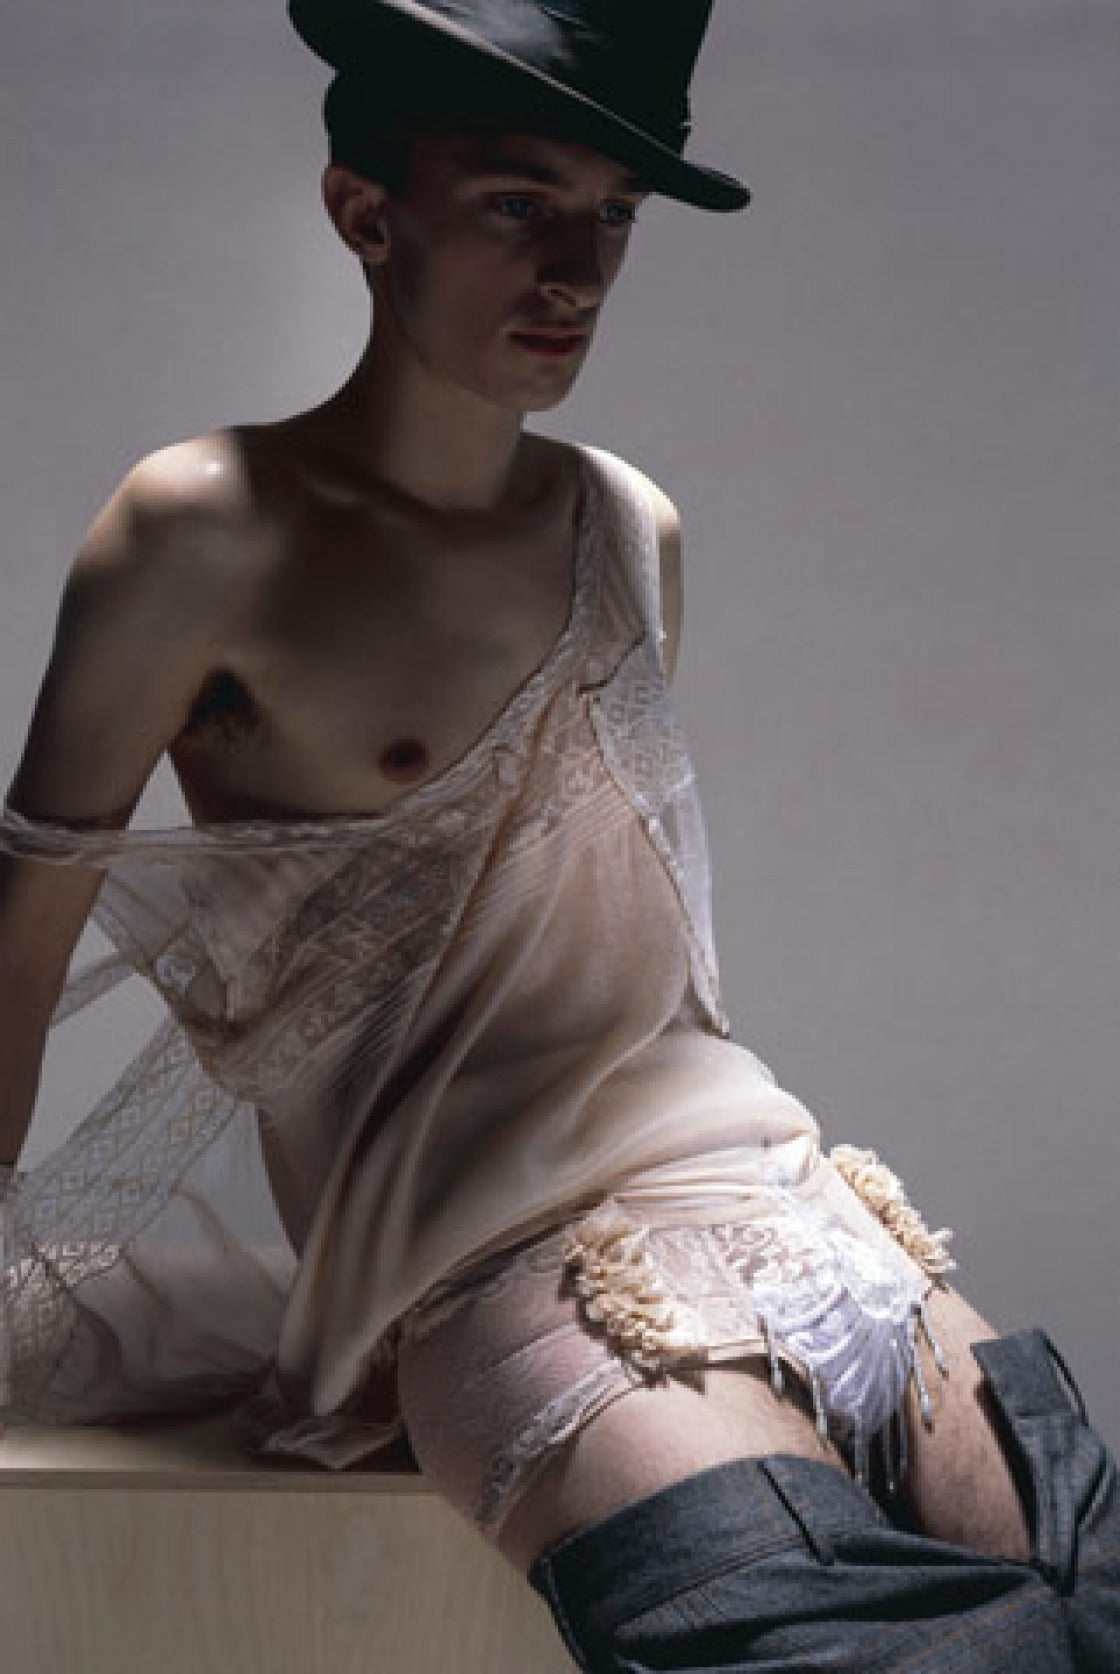 Underwear No.4 by Alister Mackie and Nick Knight